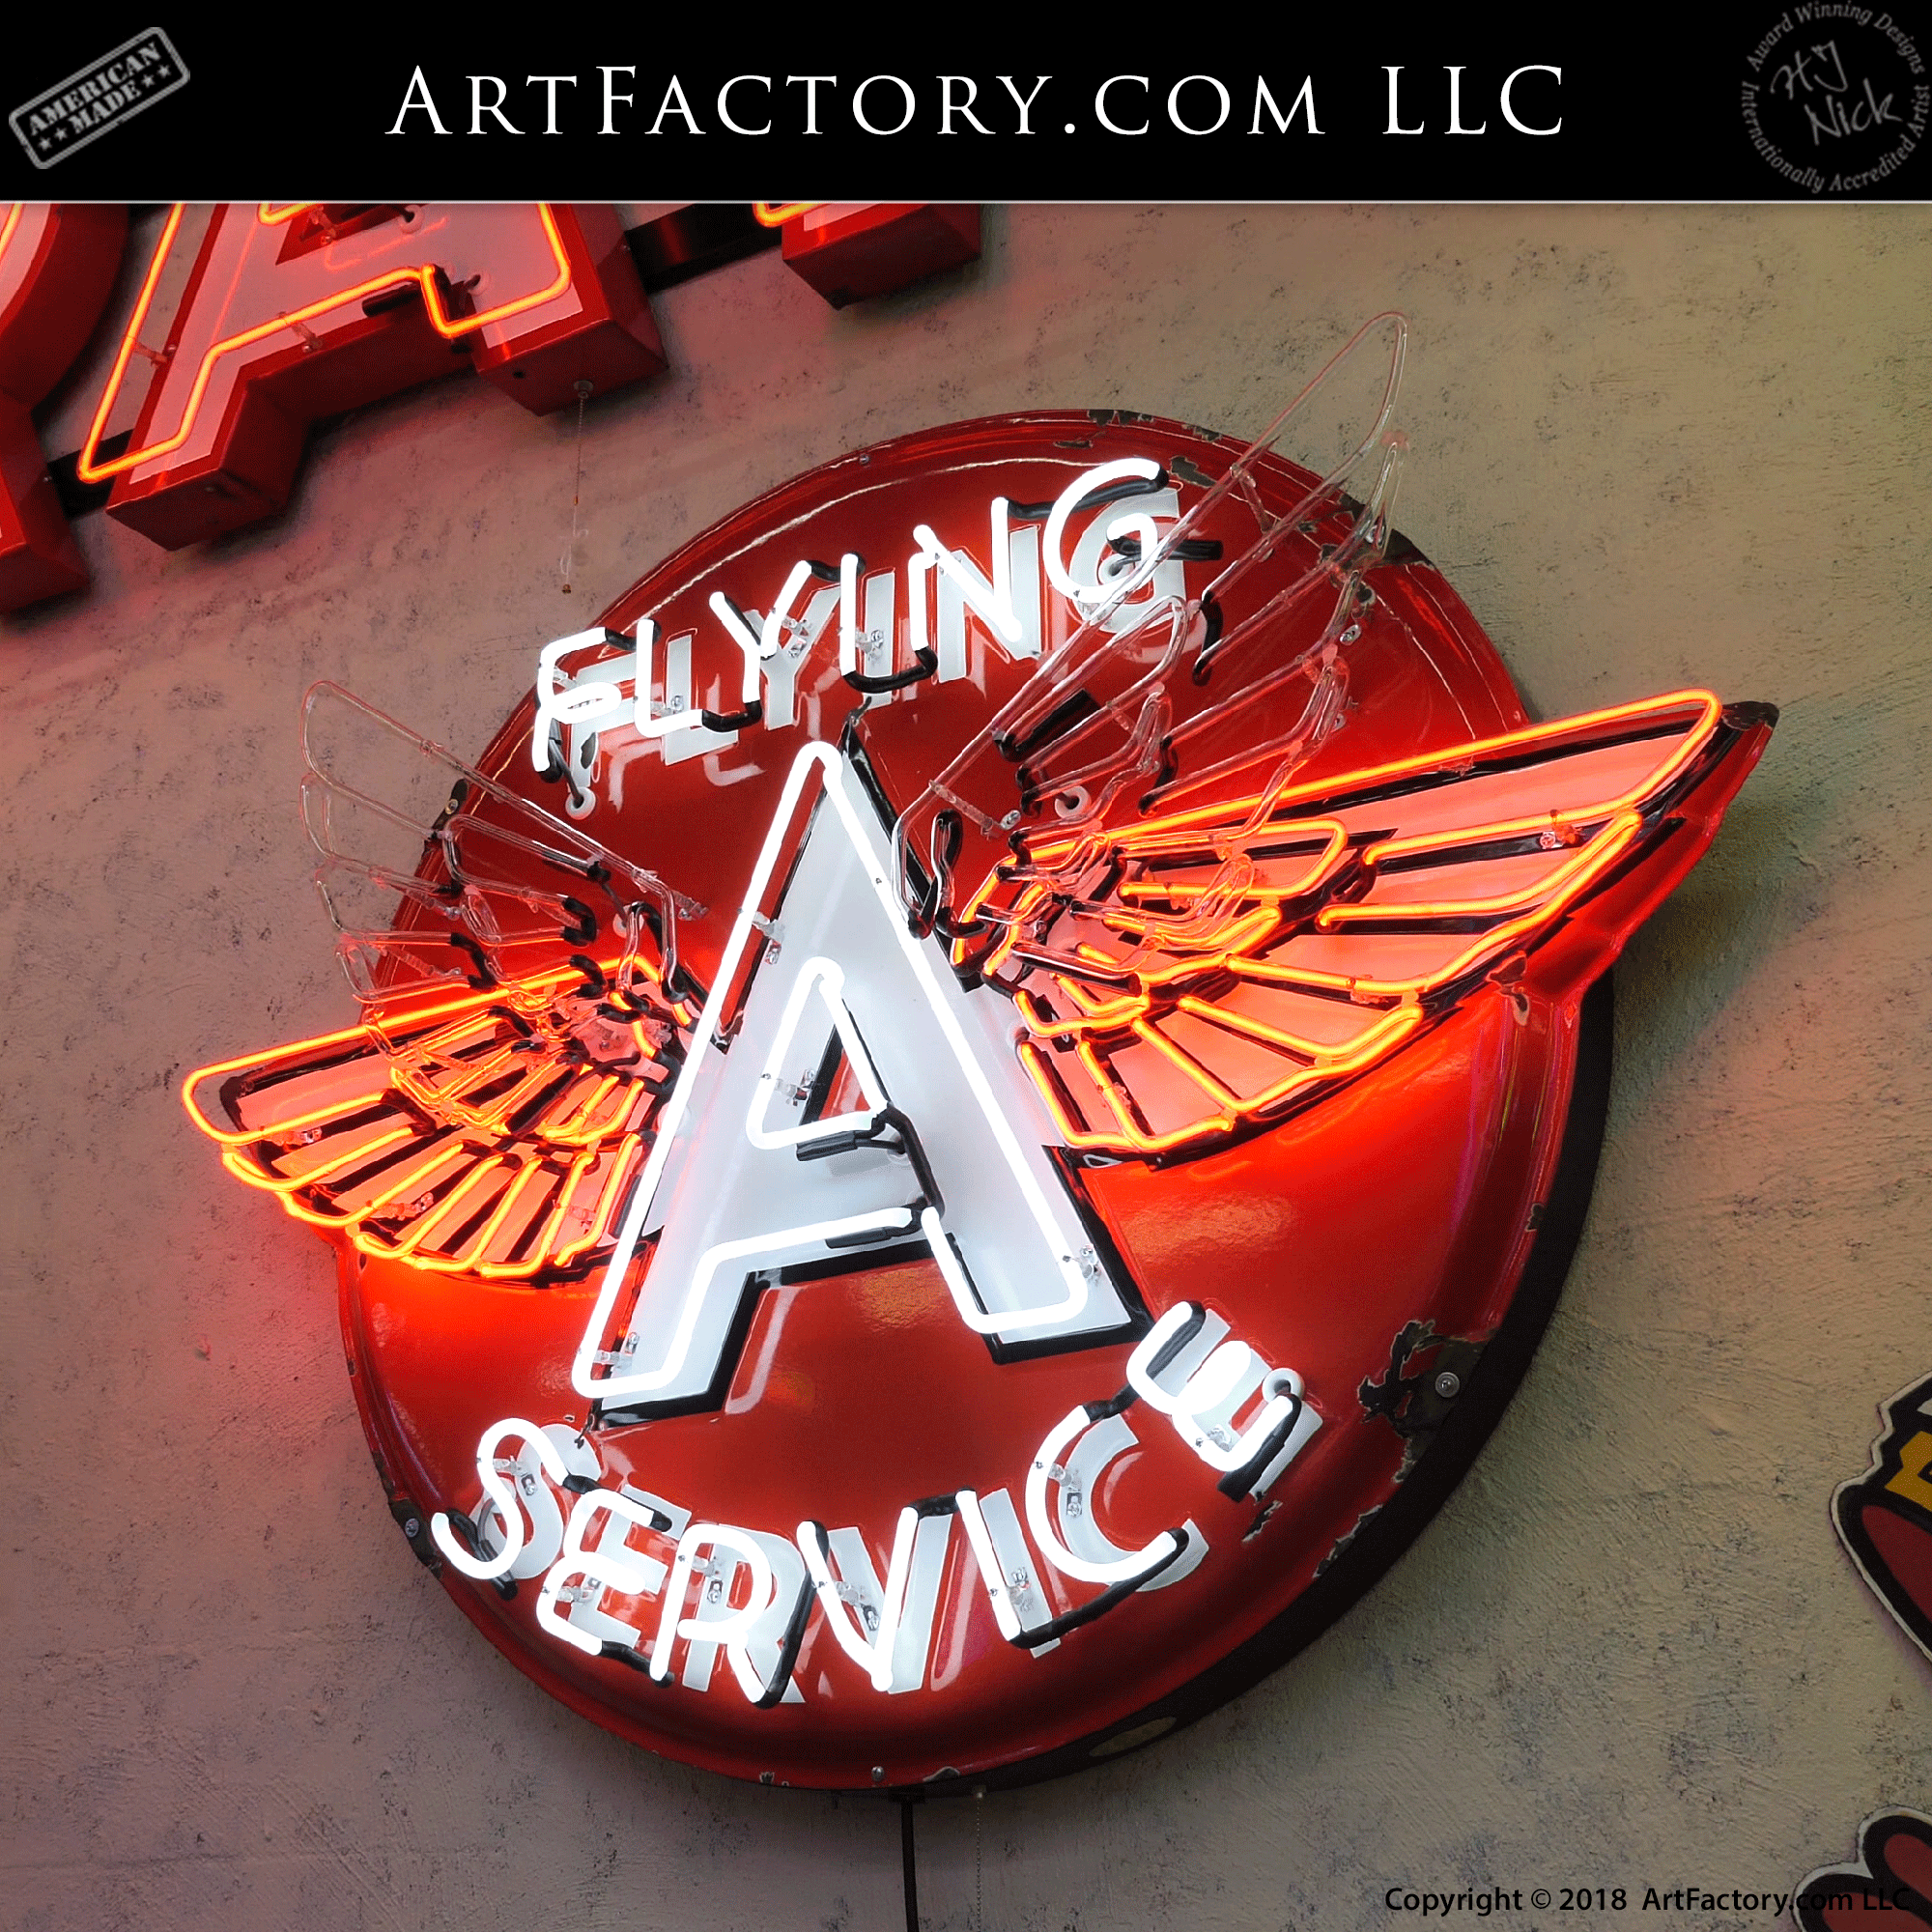 Vintage Flying A Neon Sign